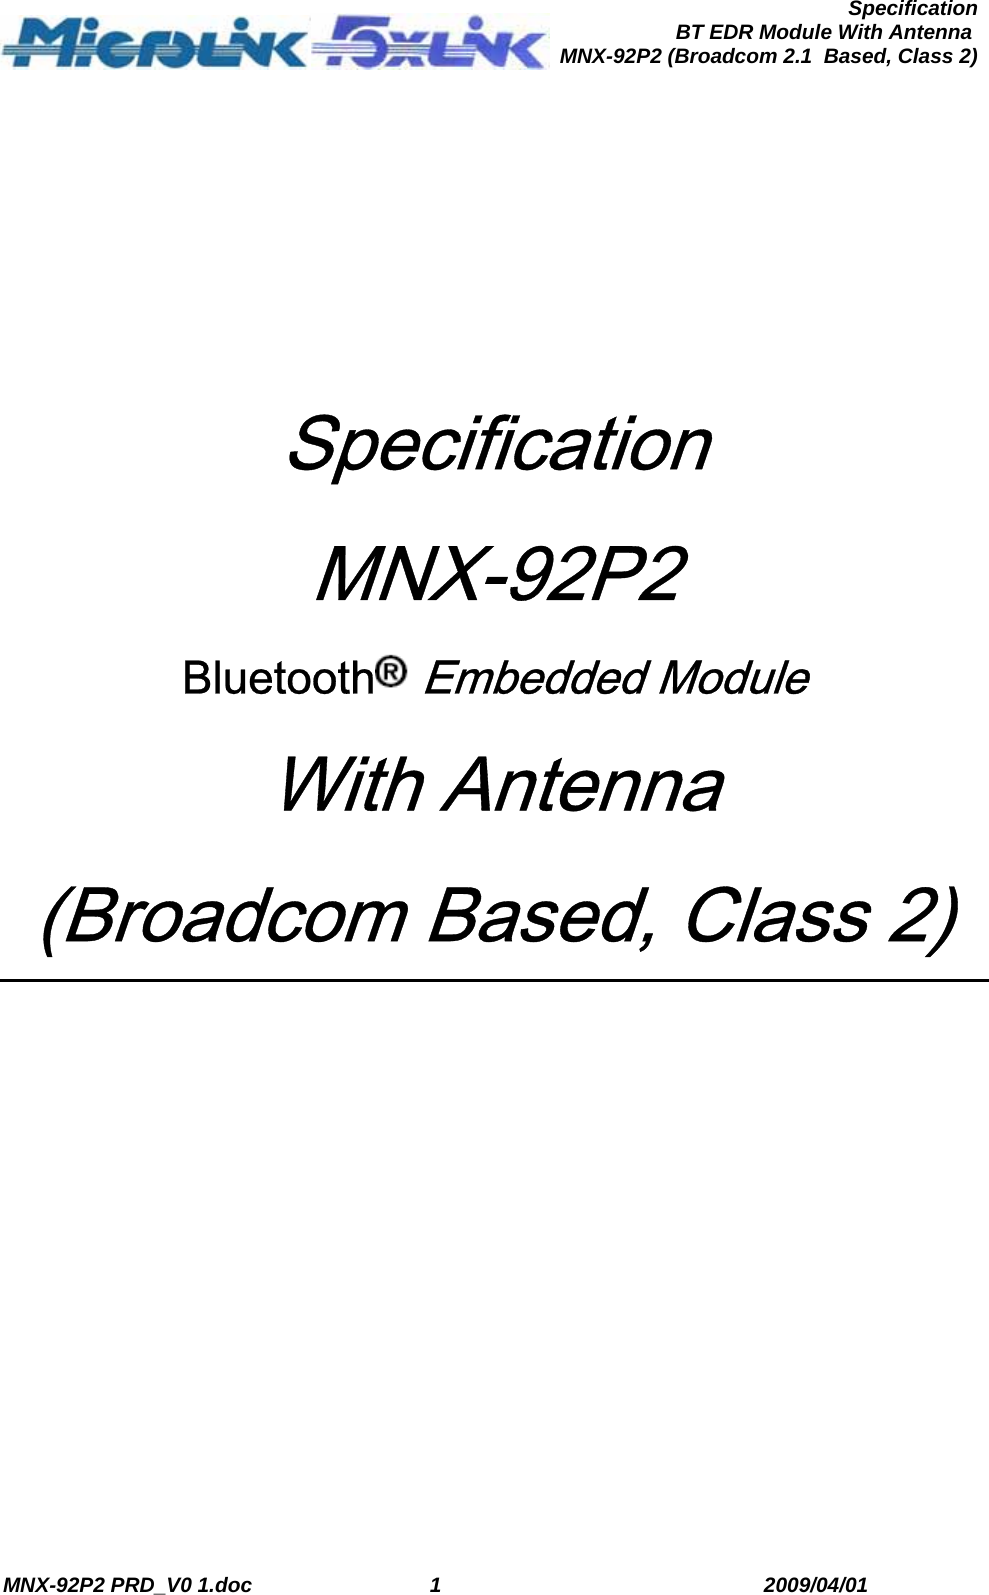  MNX-92P2 PRD_V0 1.doc  1  2009/04/01      SpecificationBT EDR Module With Antenna MNX-92P2 (Broadcom 2.1  Based, Class 2)   Specification MNX-92P2 Bluetooth Embedded Module With Antenna (Broadcom Based, Class 2)  